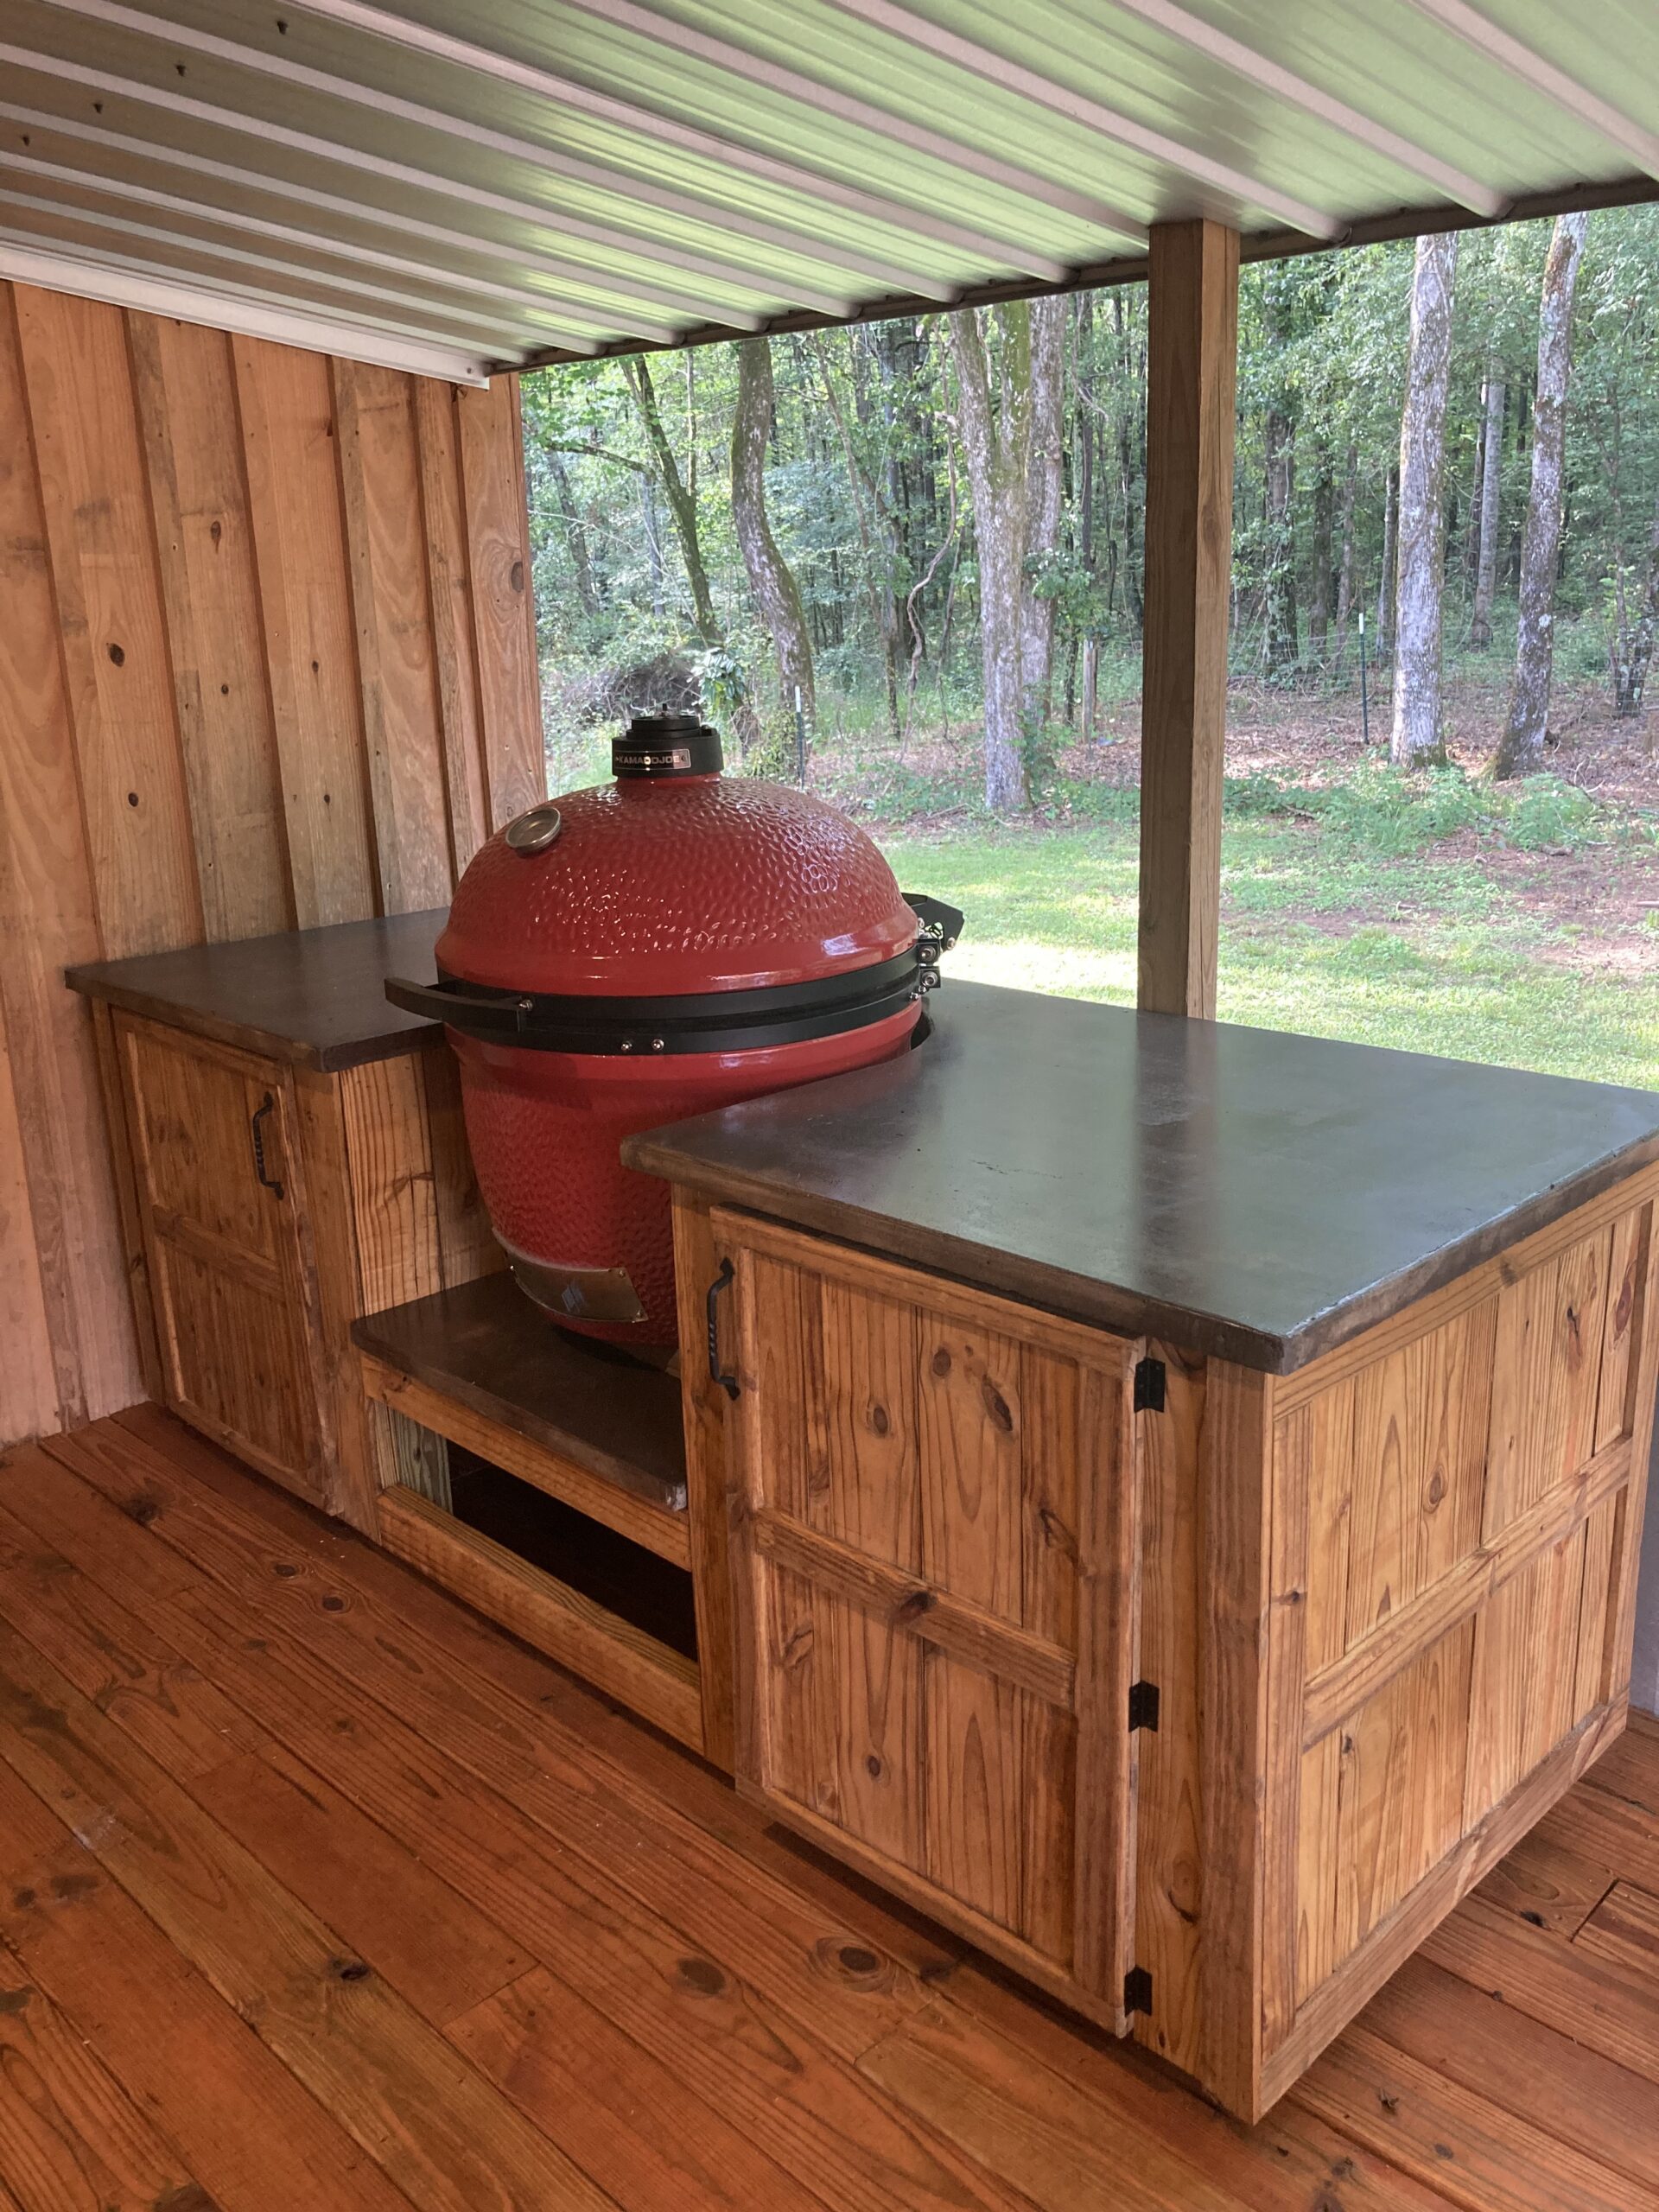 Concrete countertop perched on a rustic wood base featuring a round red BBQ with its lid